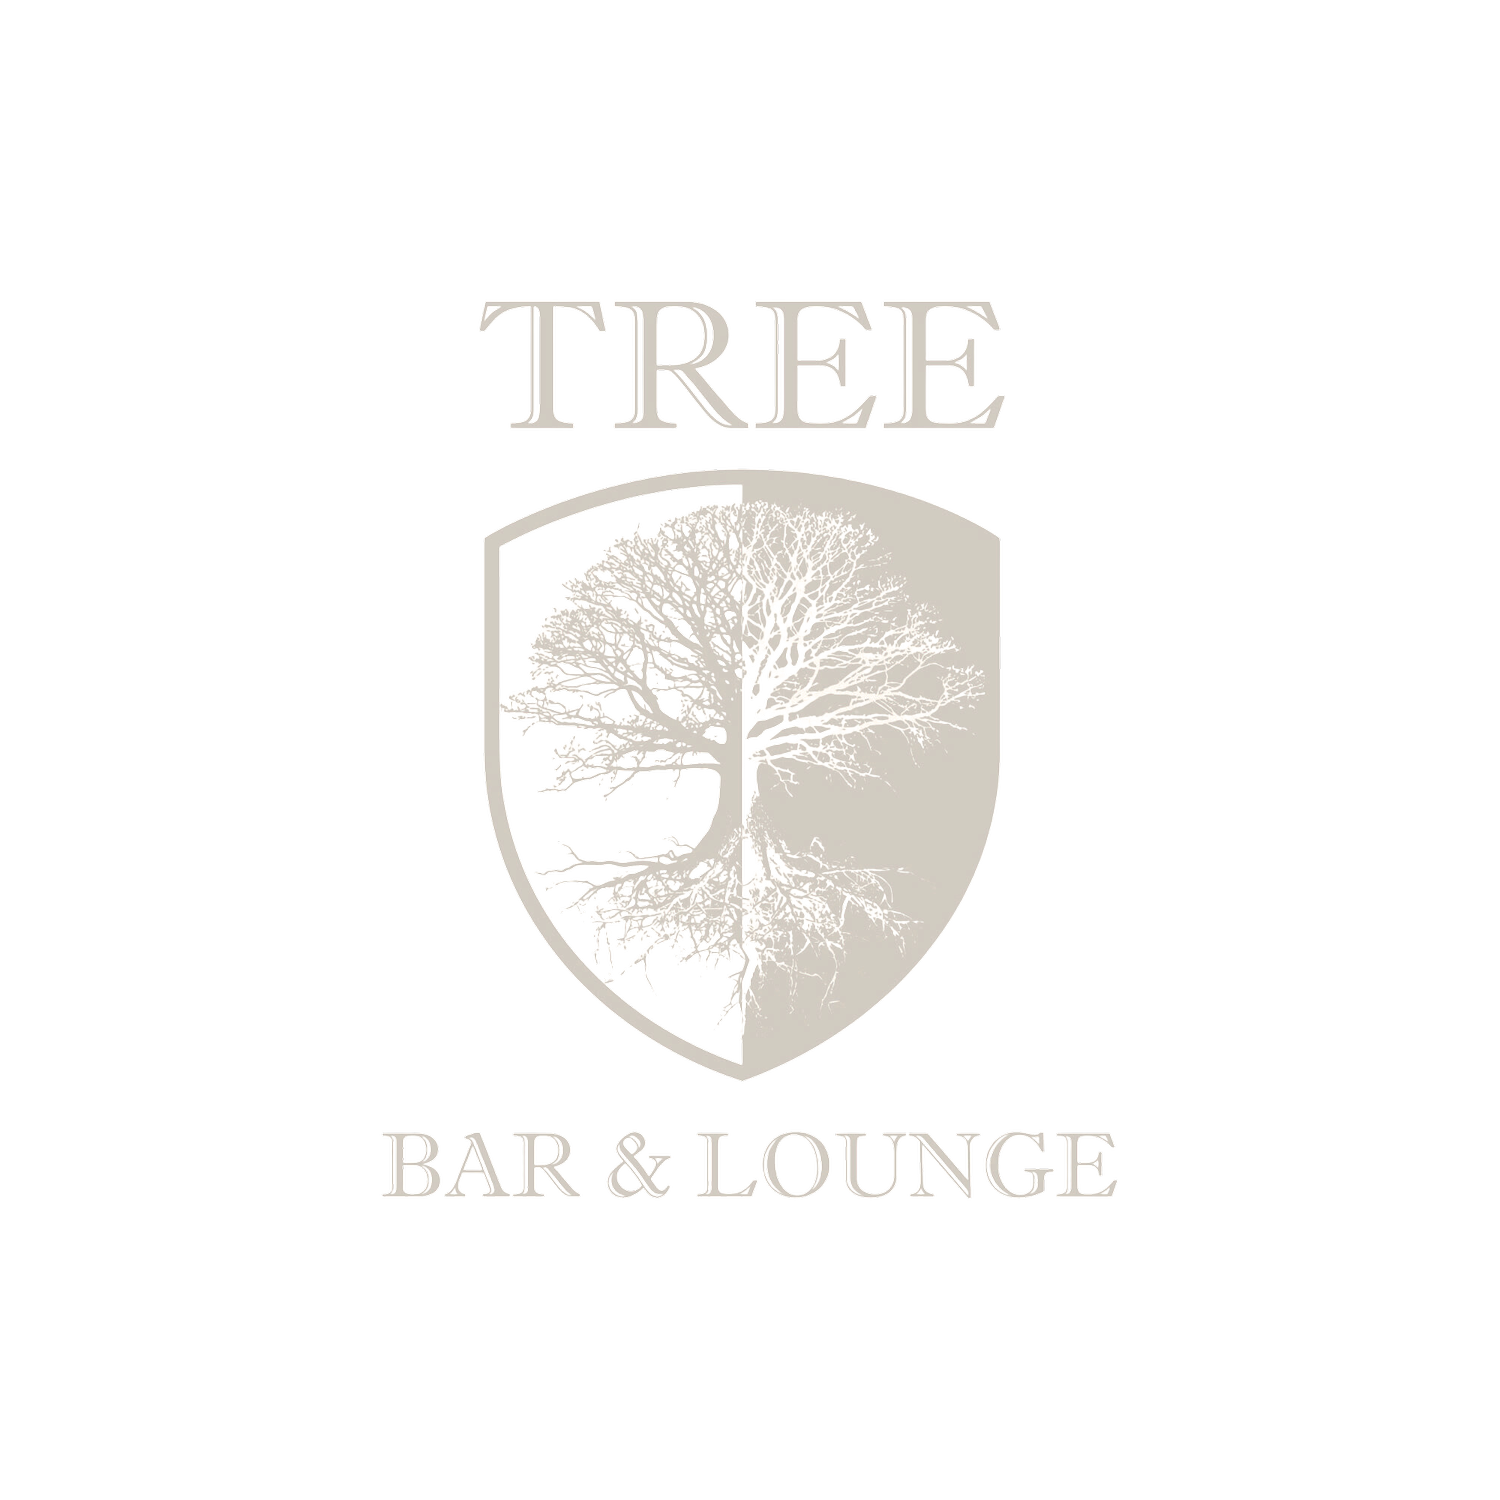 The Tree Bar and Lounge